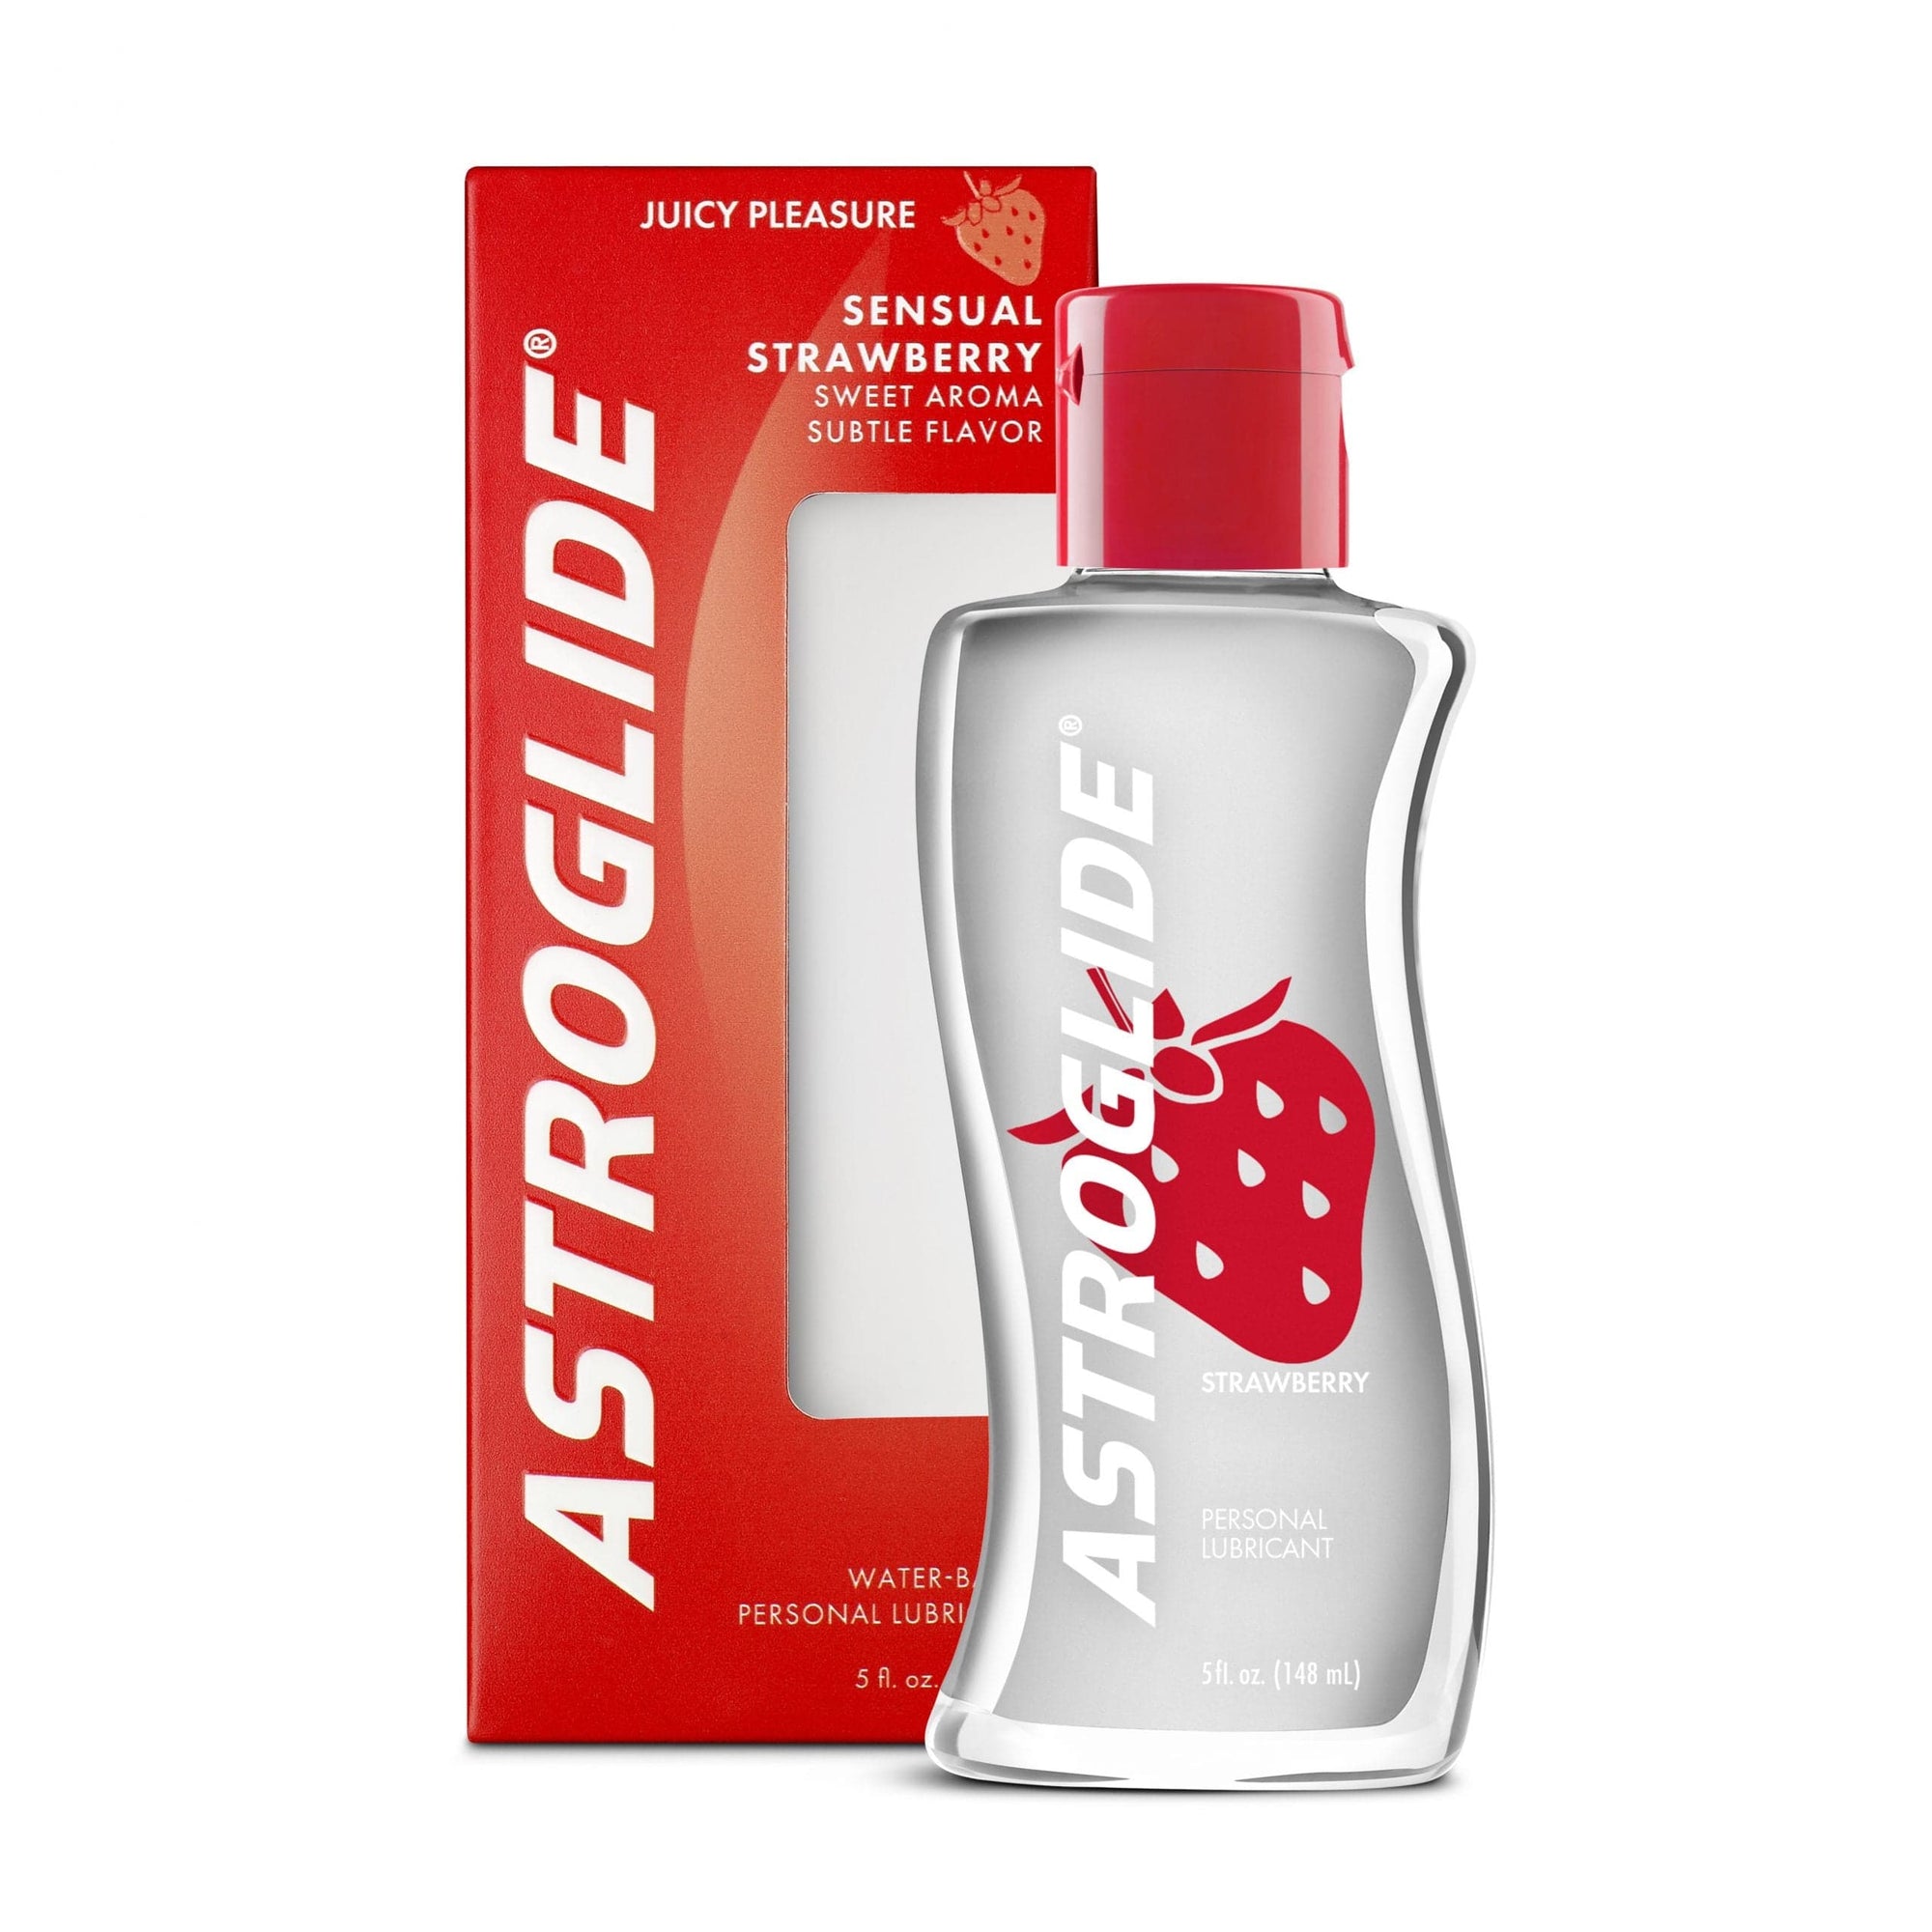 Astroglide - Sensual Strawberry Flavoured Water Based Personal Lubricant - 148ml Lube (Water Based) 015594010243 Durio.sg